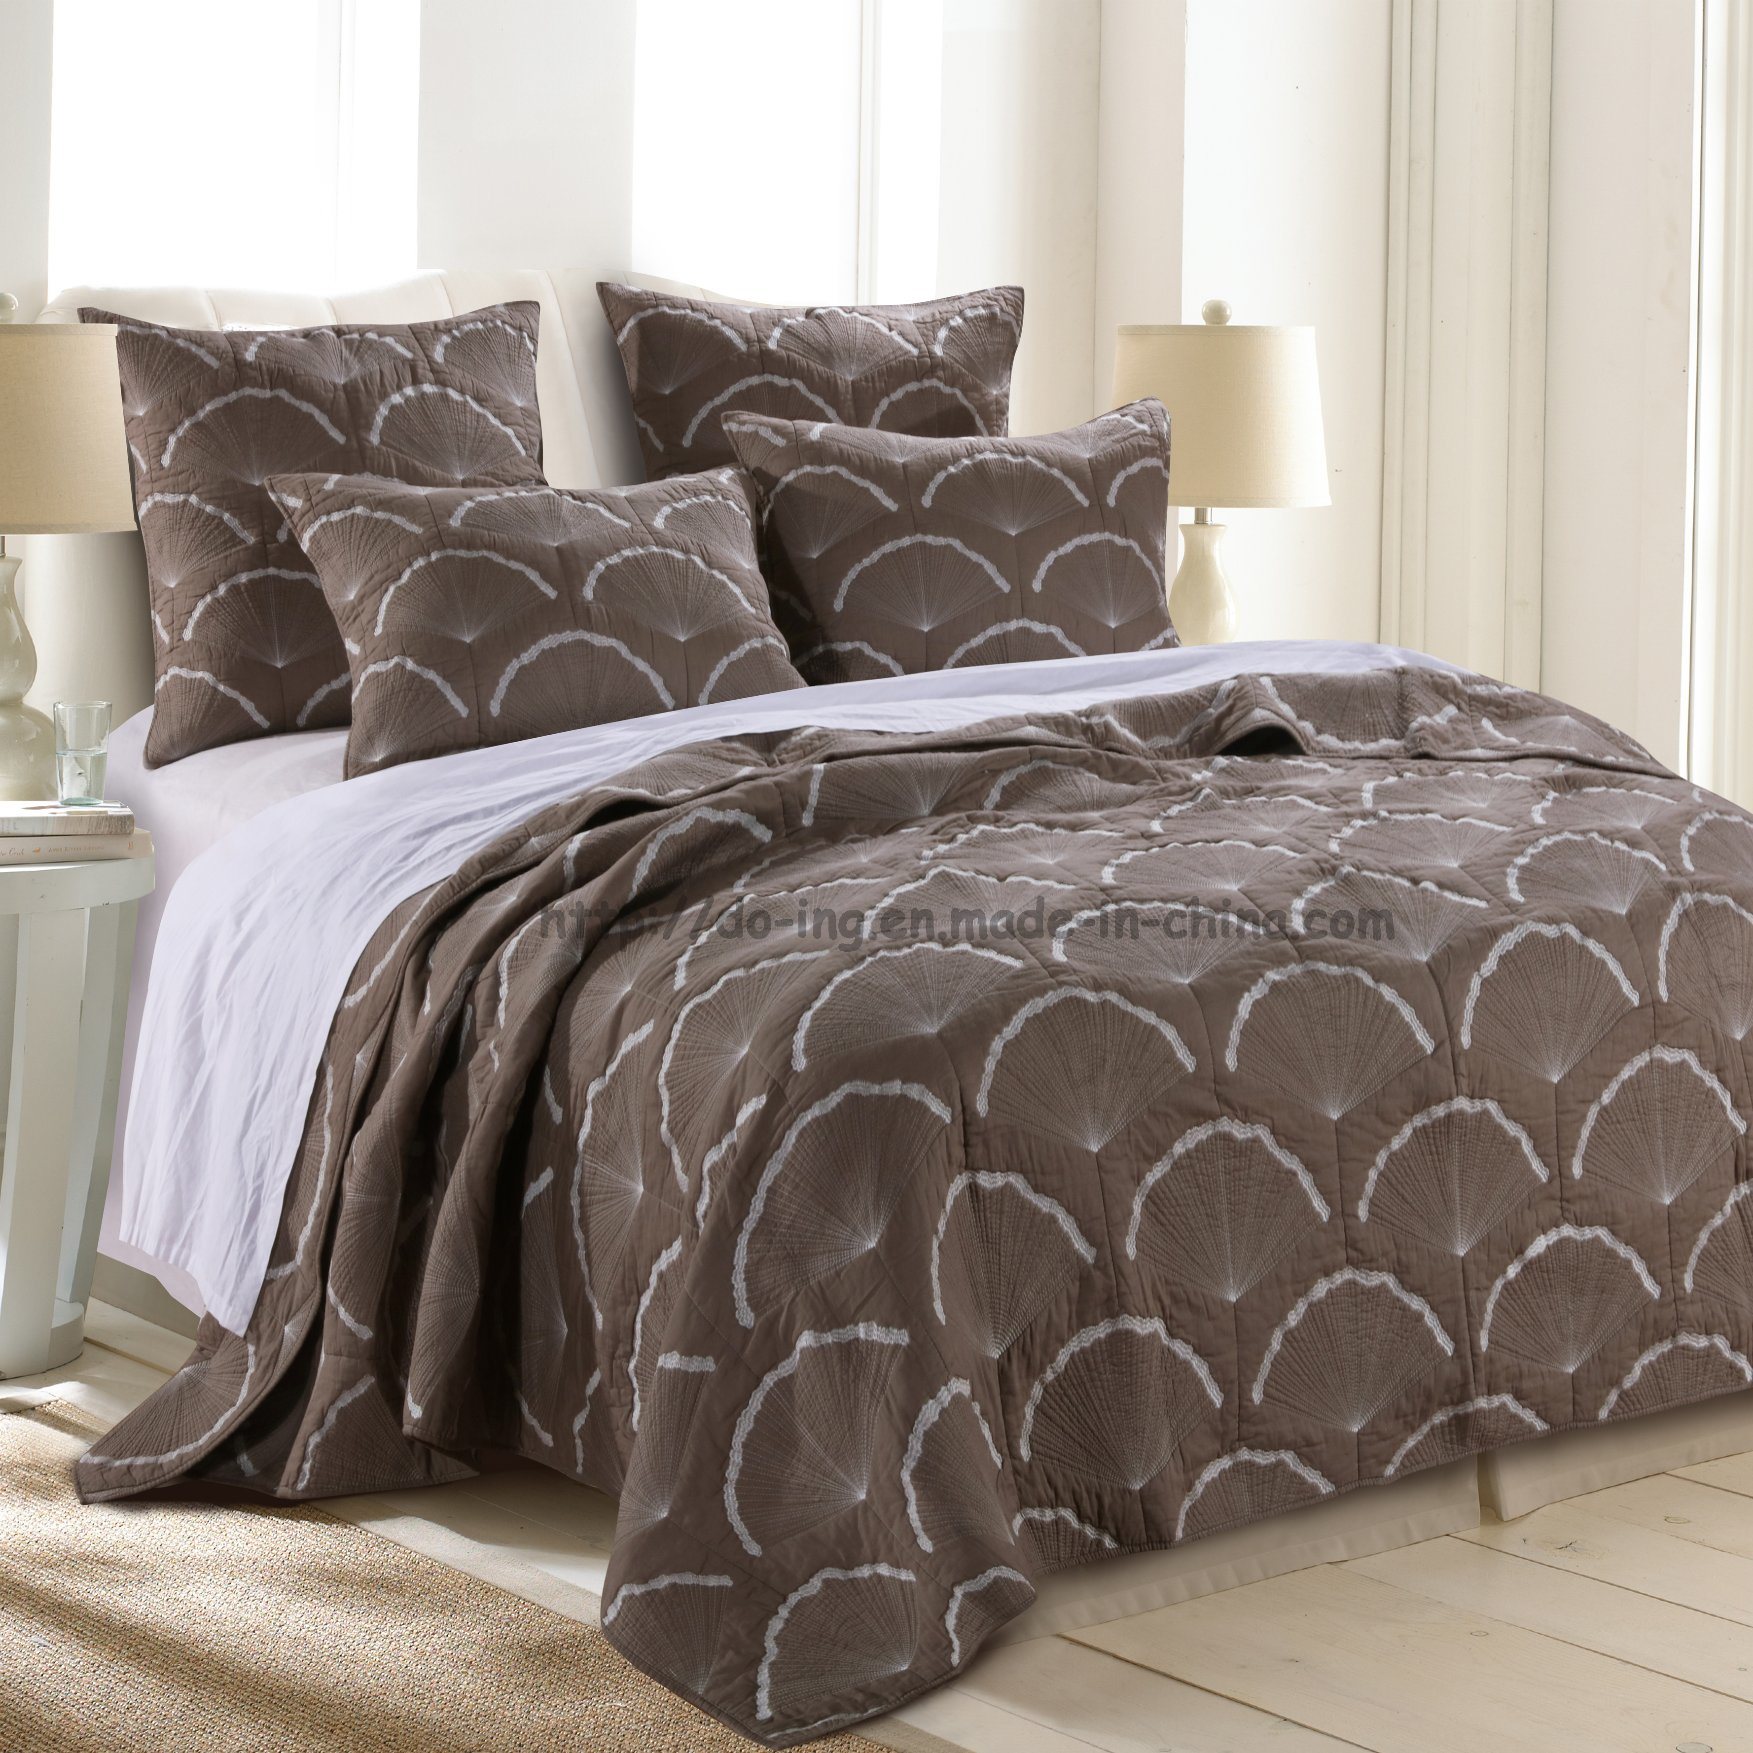 Cotton Embroidered Quilt in Natural (DO6097)